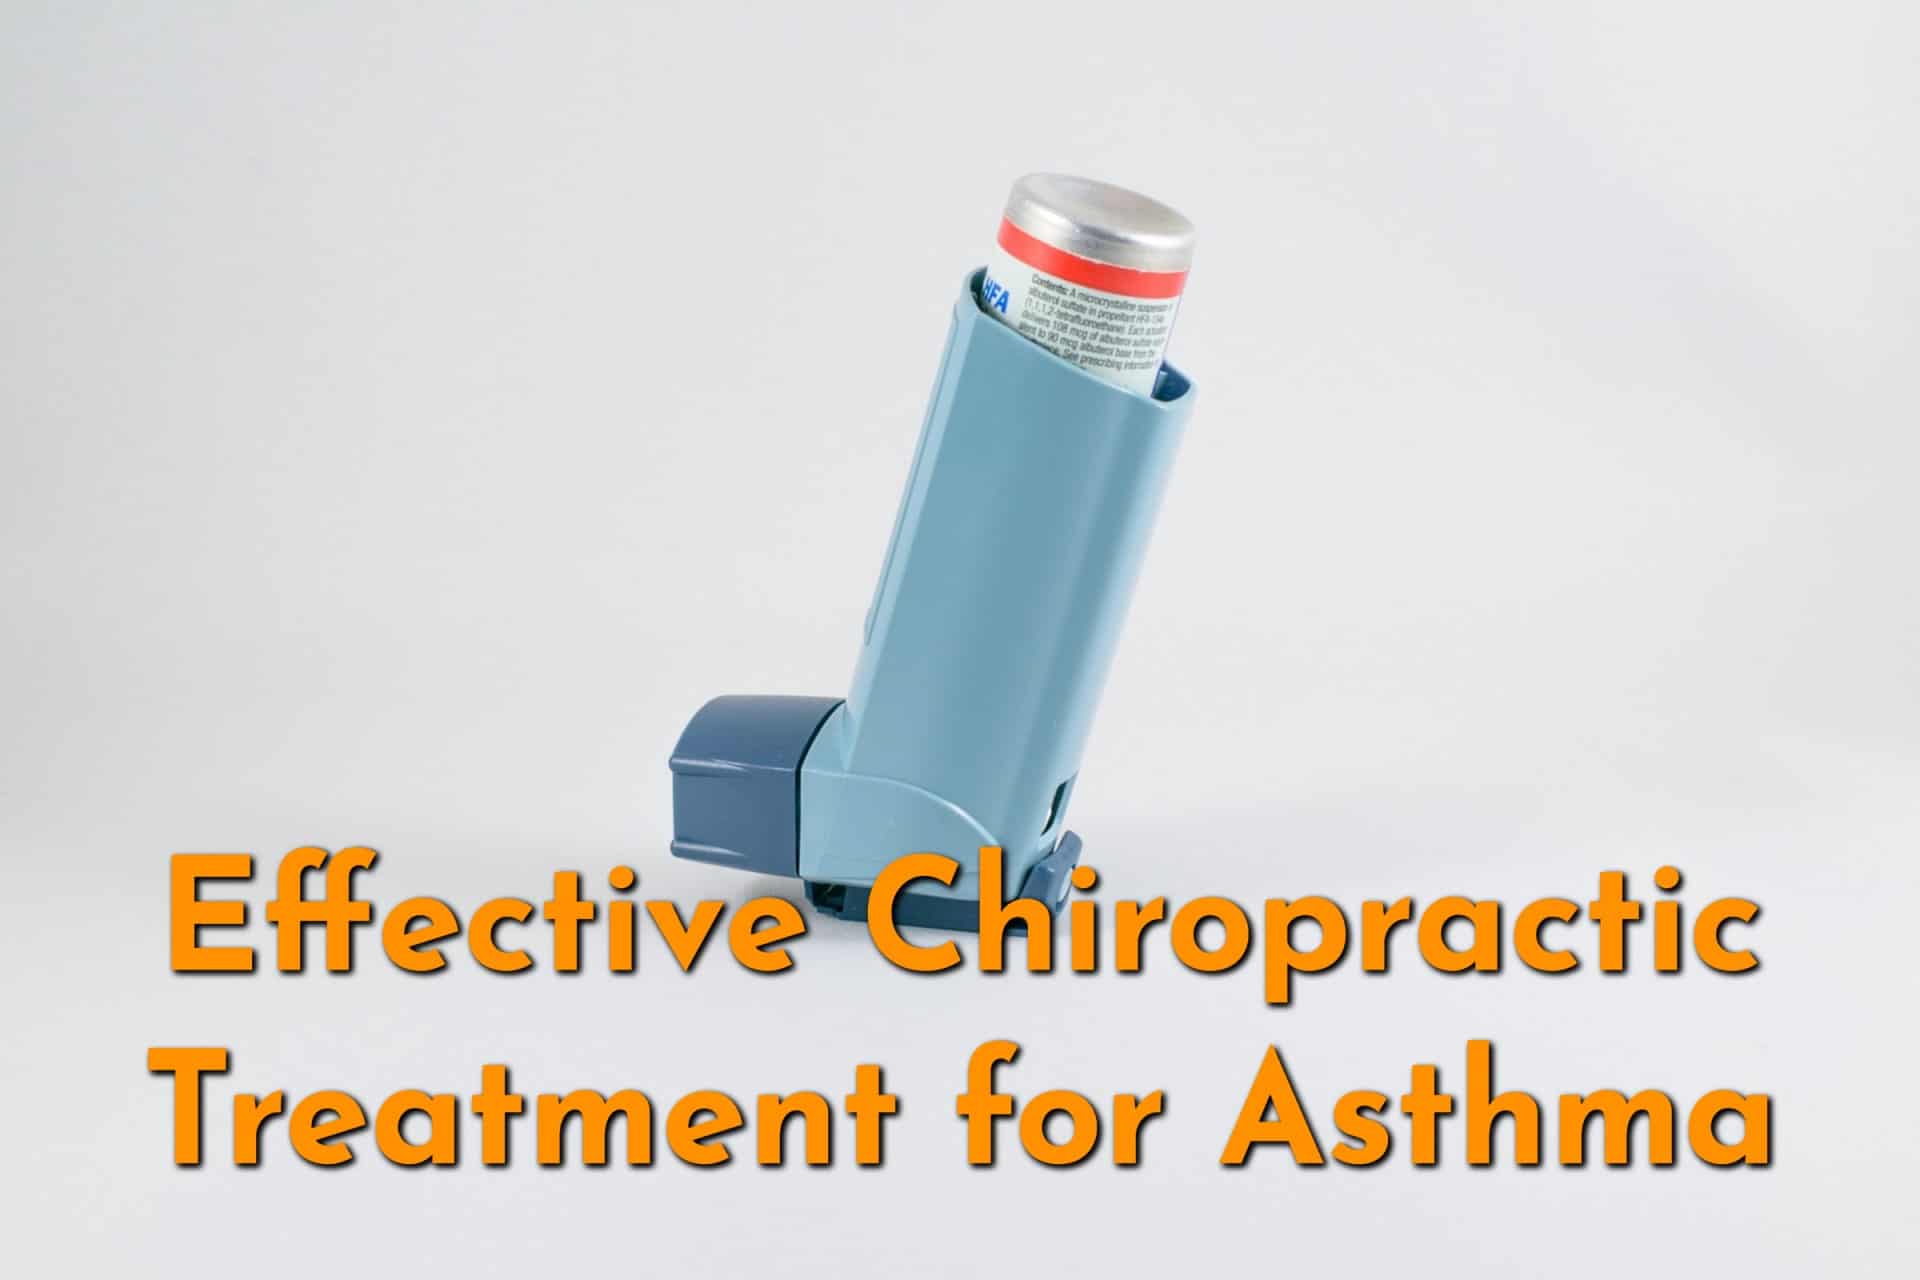 Does Chiropractic Treatment For Asthma Work Breathe Better With Chiro